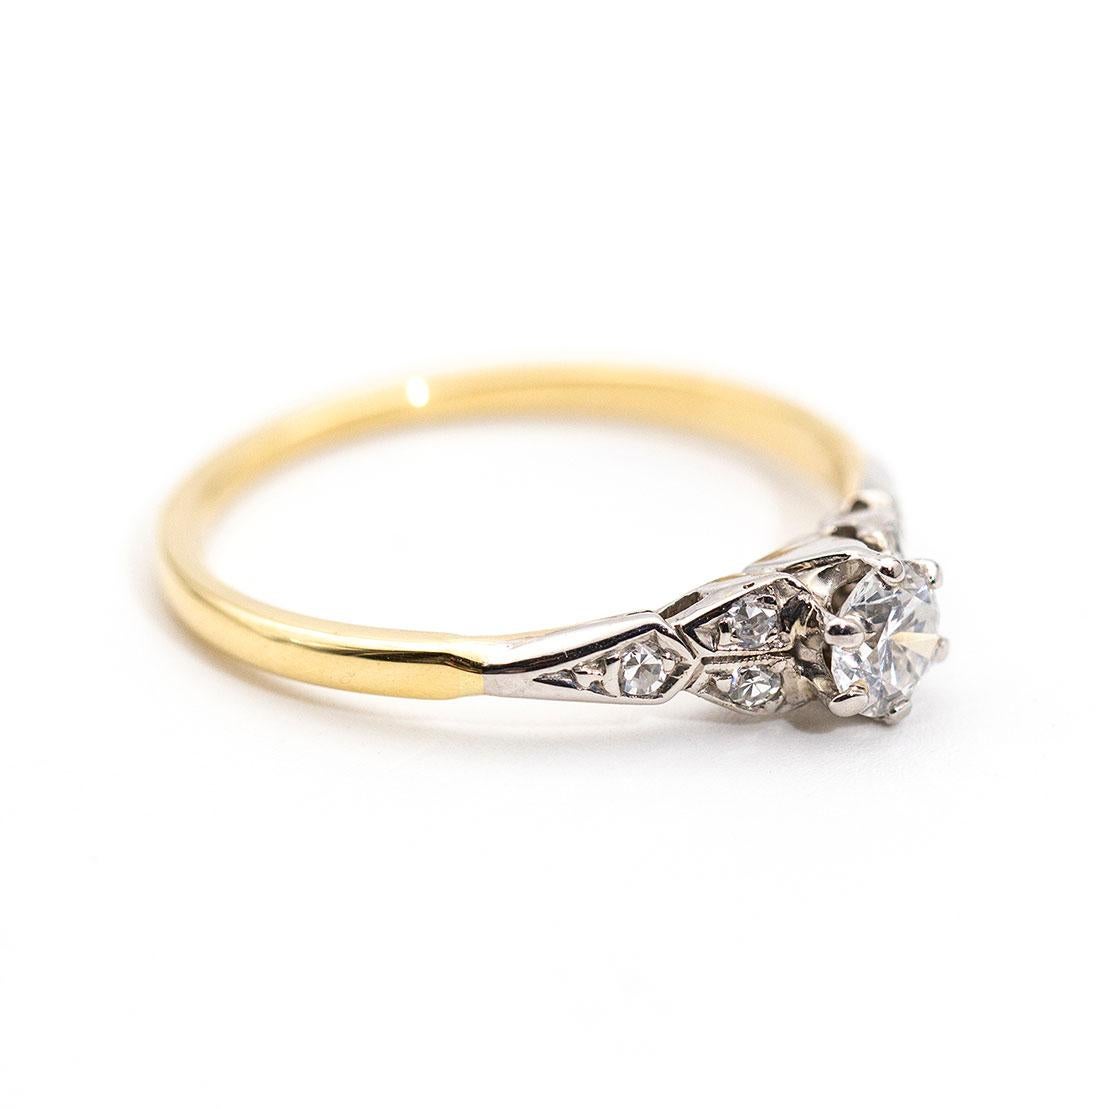 Lovingly crafted in 18 carat yellow and white gold is this darling vintage ring flaunting a central 0.32 carat round brilliant cut diamond flanked by smaller round diamonds in the band. We have named this vintage splendour The Camille Ring. The